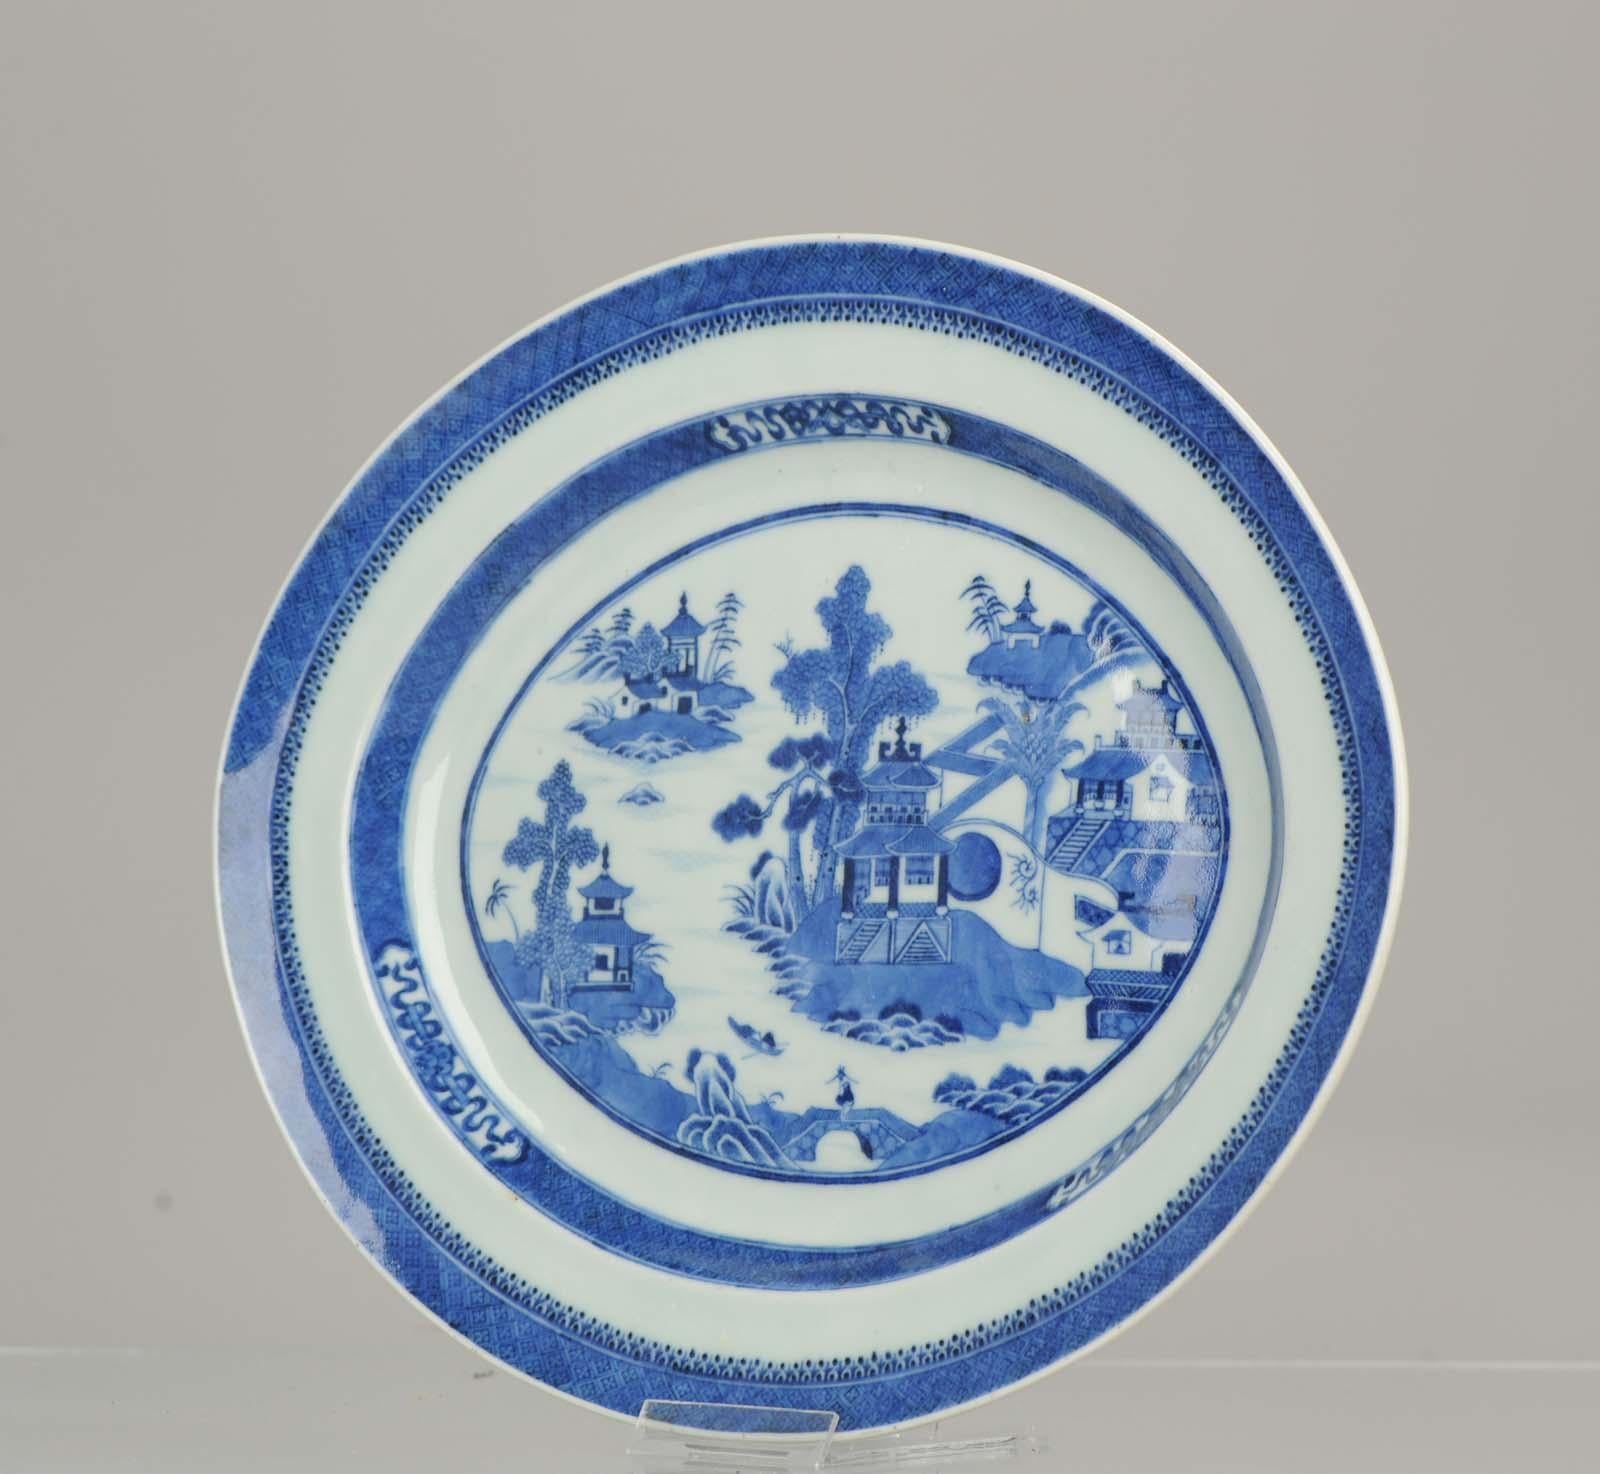 An excellent, shallow and large serving dish, exceptionally finely painted in underglaze blue with central reserve of an island village with pagodes, palm trees and fishermen. Further tasteful concentric borders of dark diaper pattern, 18th